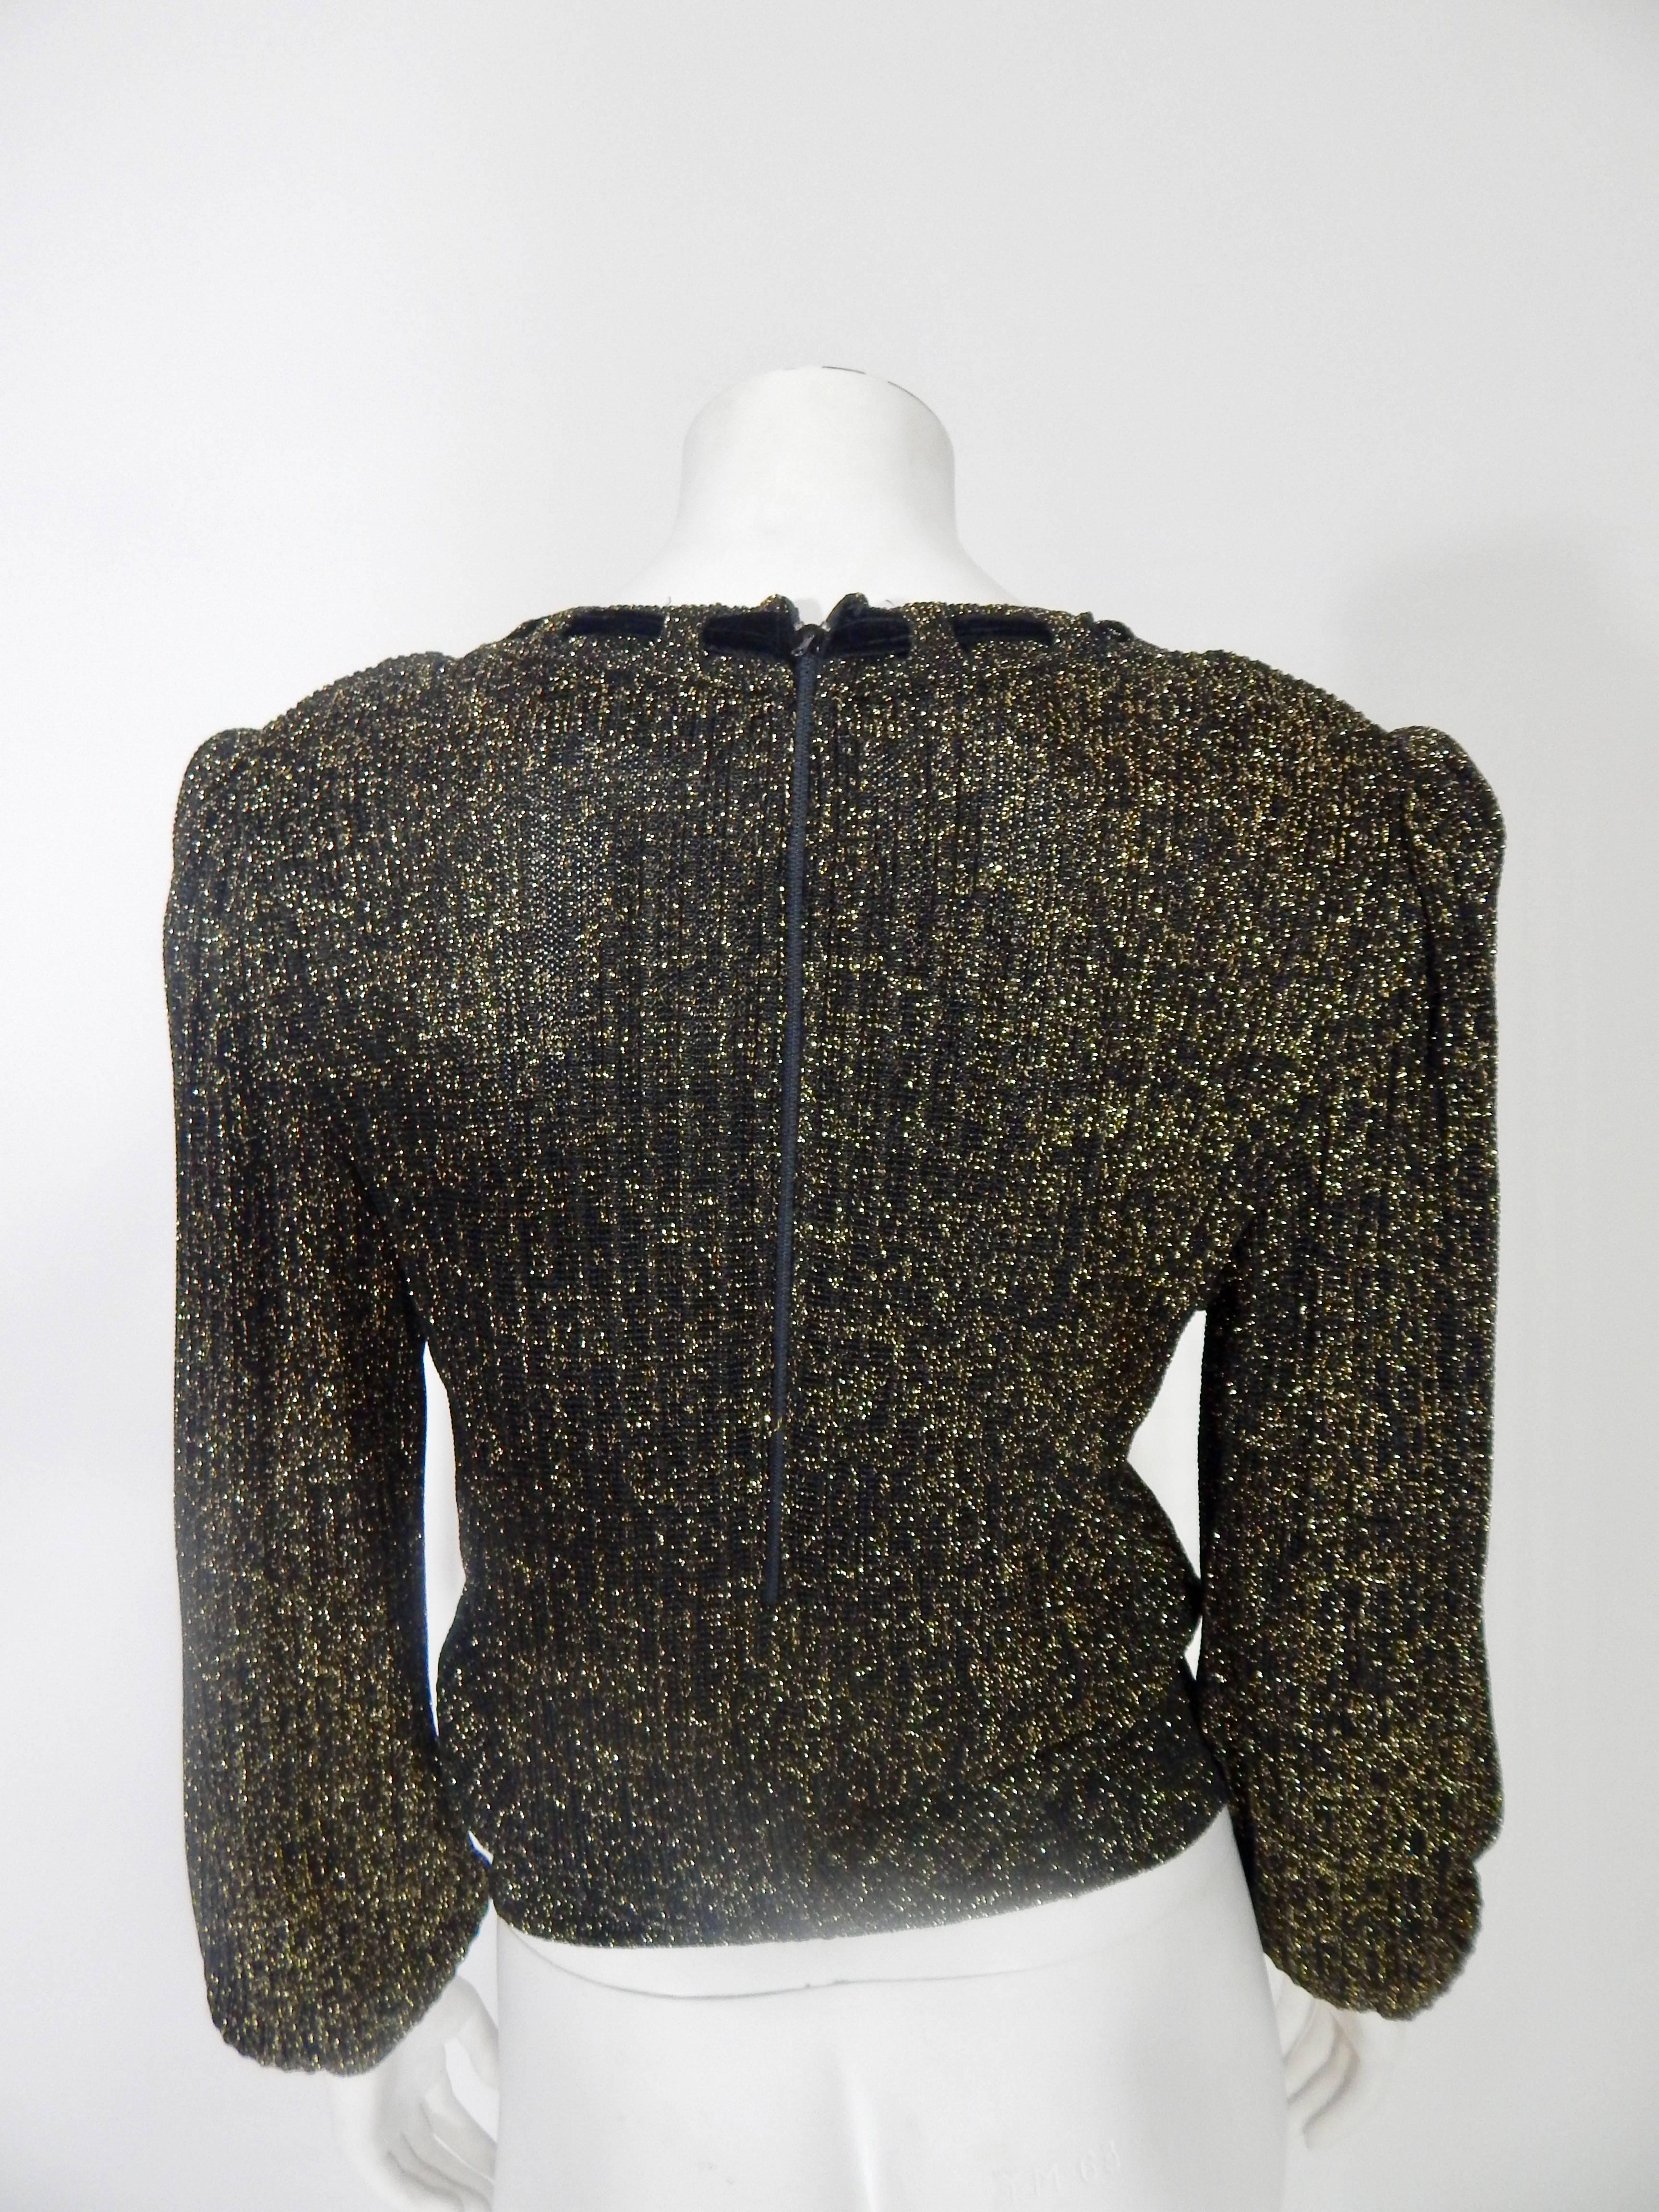 1970s Black and Gold Metalic Top In Excellent Condition For Sale In Long Island City, NY